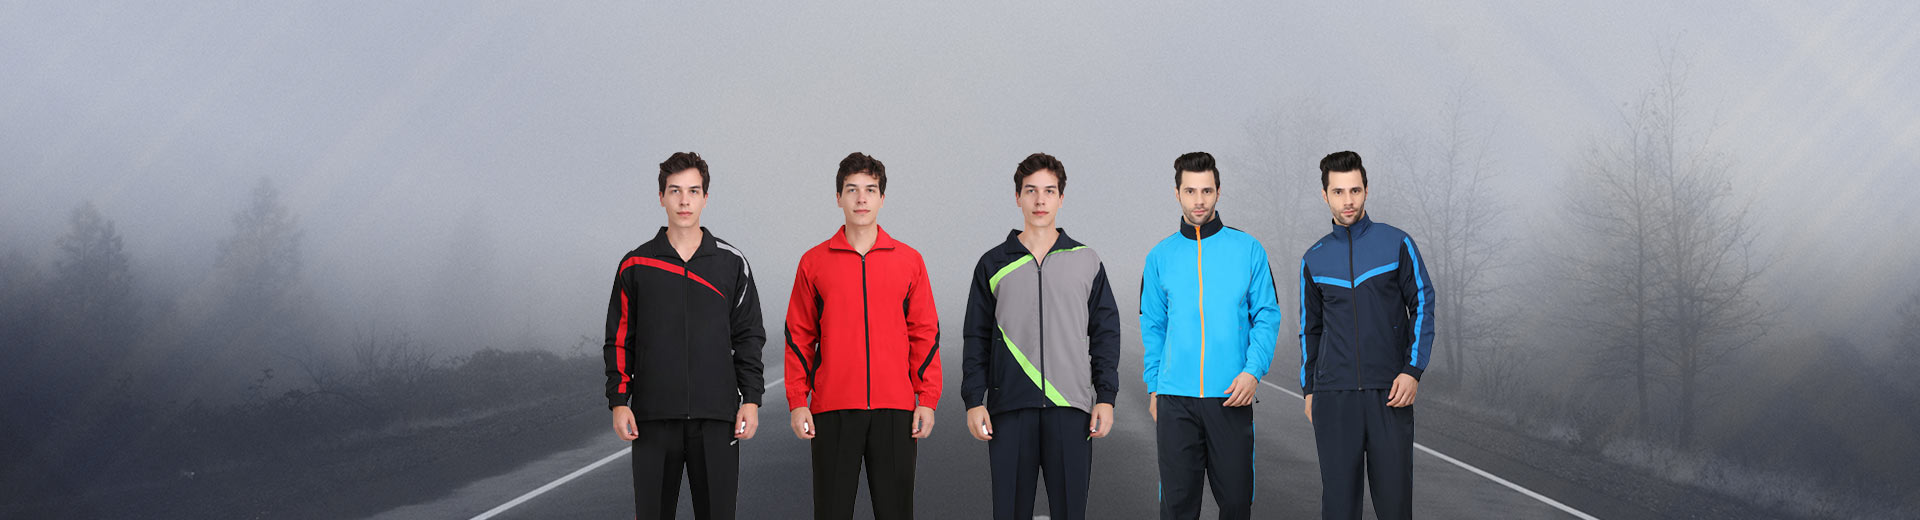 Tracksuits Manufacturers in Solingen